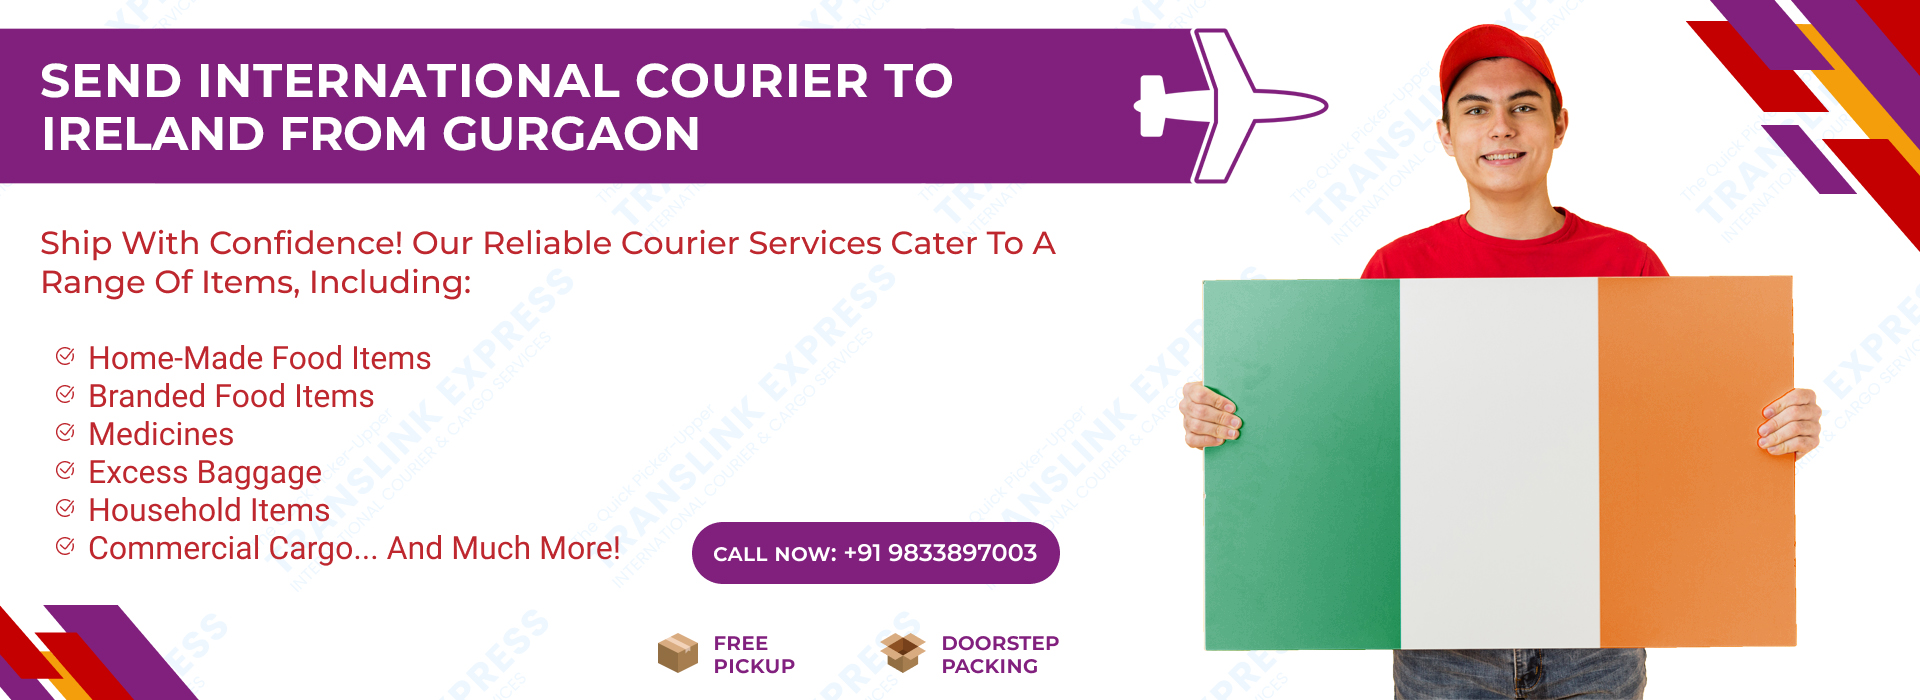 Courier to Ireland From Gurgaon